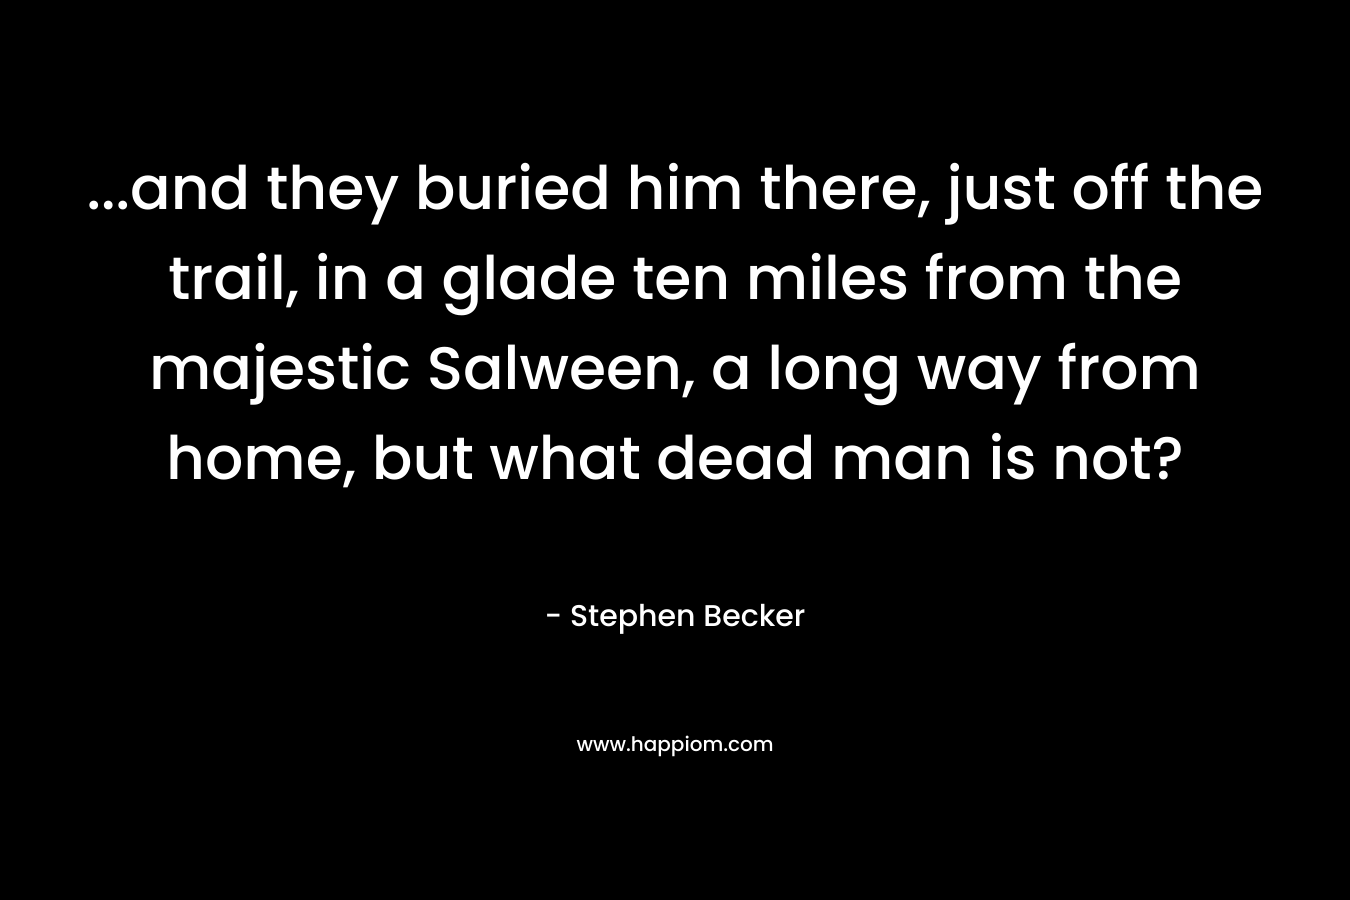 …and they buried him there, just off the trail, in a glade ten miles from the majestic Salween, a long way from home, but what dead man is not? – Stephen Becker